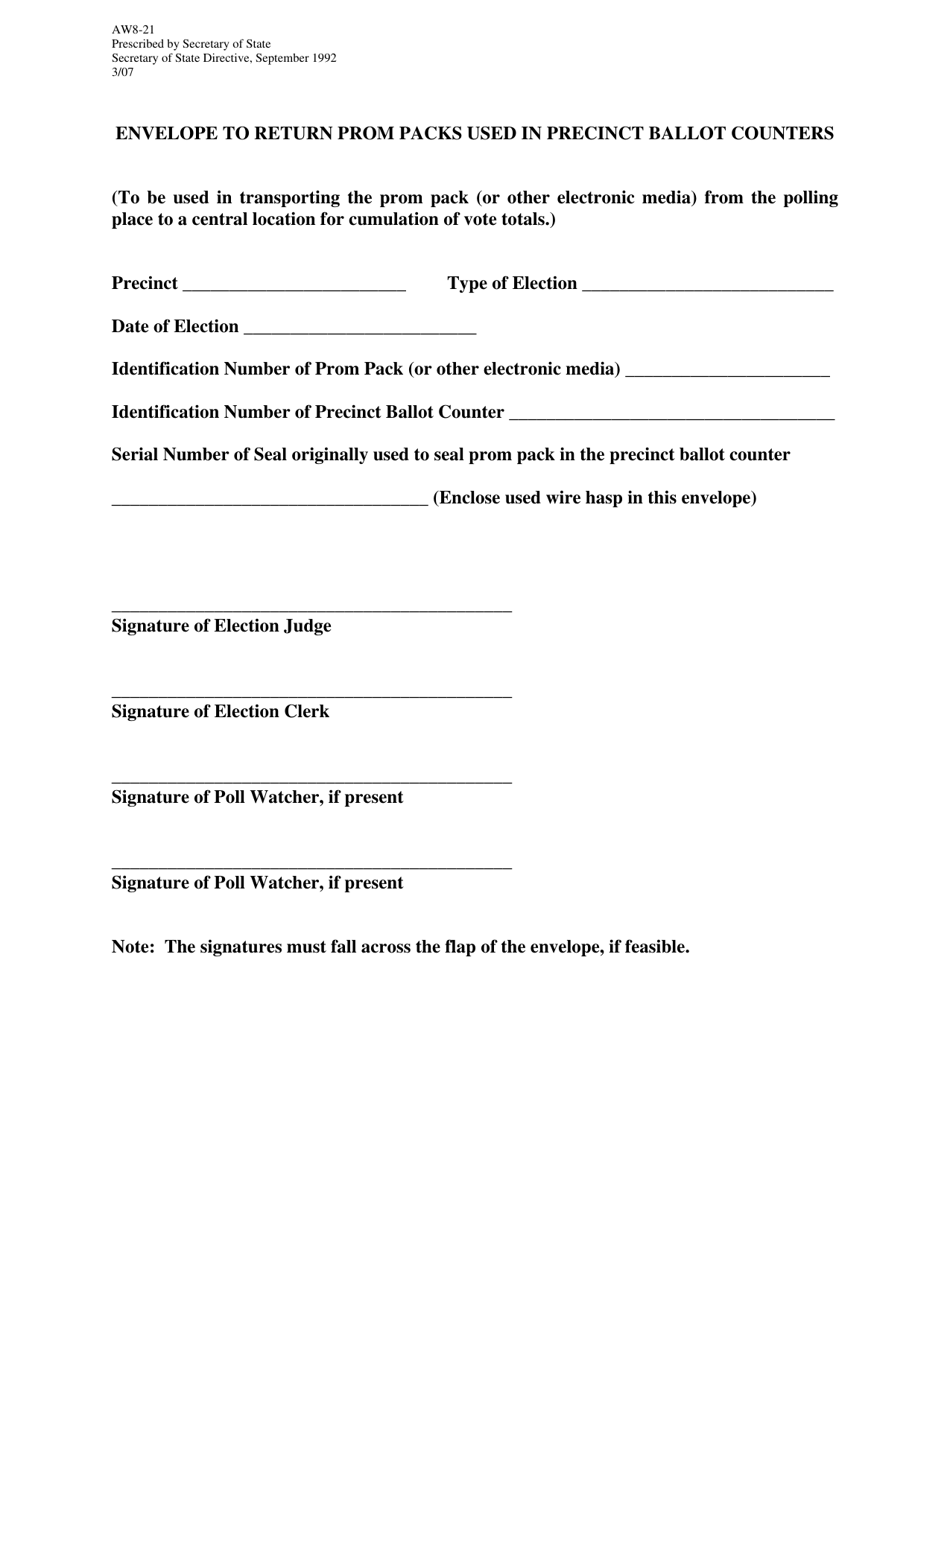 Form AW8-21 Envelope to Return Prom Packs Used in Precinct Ballot Counters - Texas, Page 1